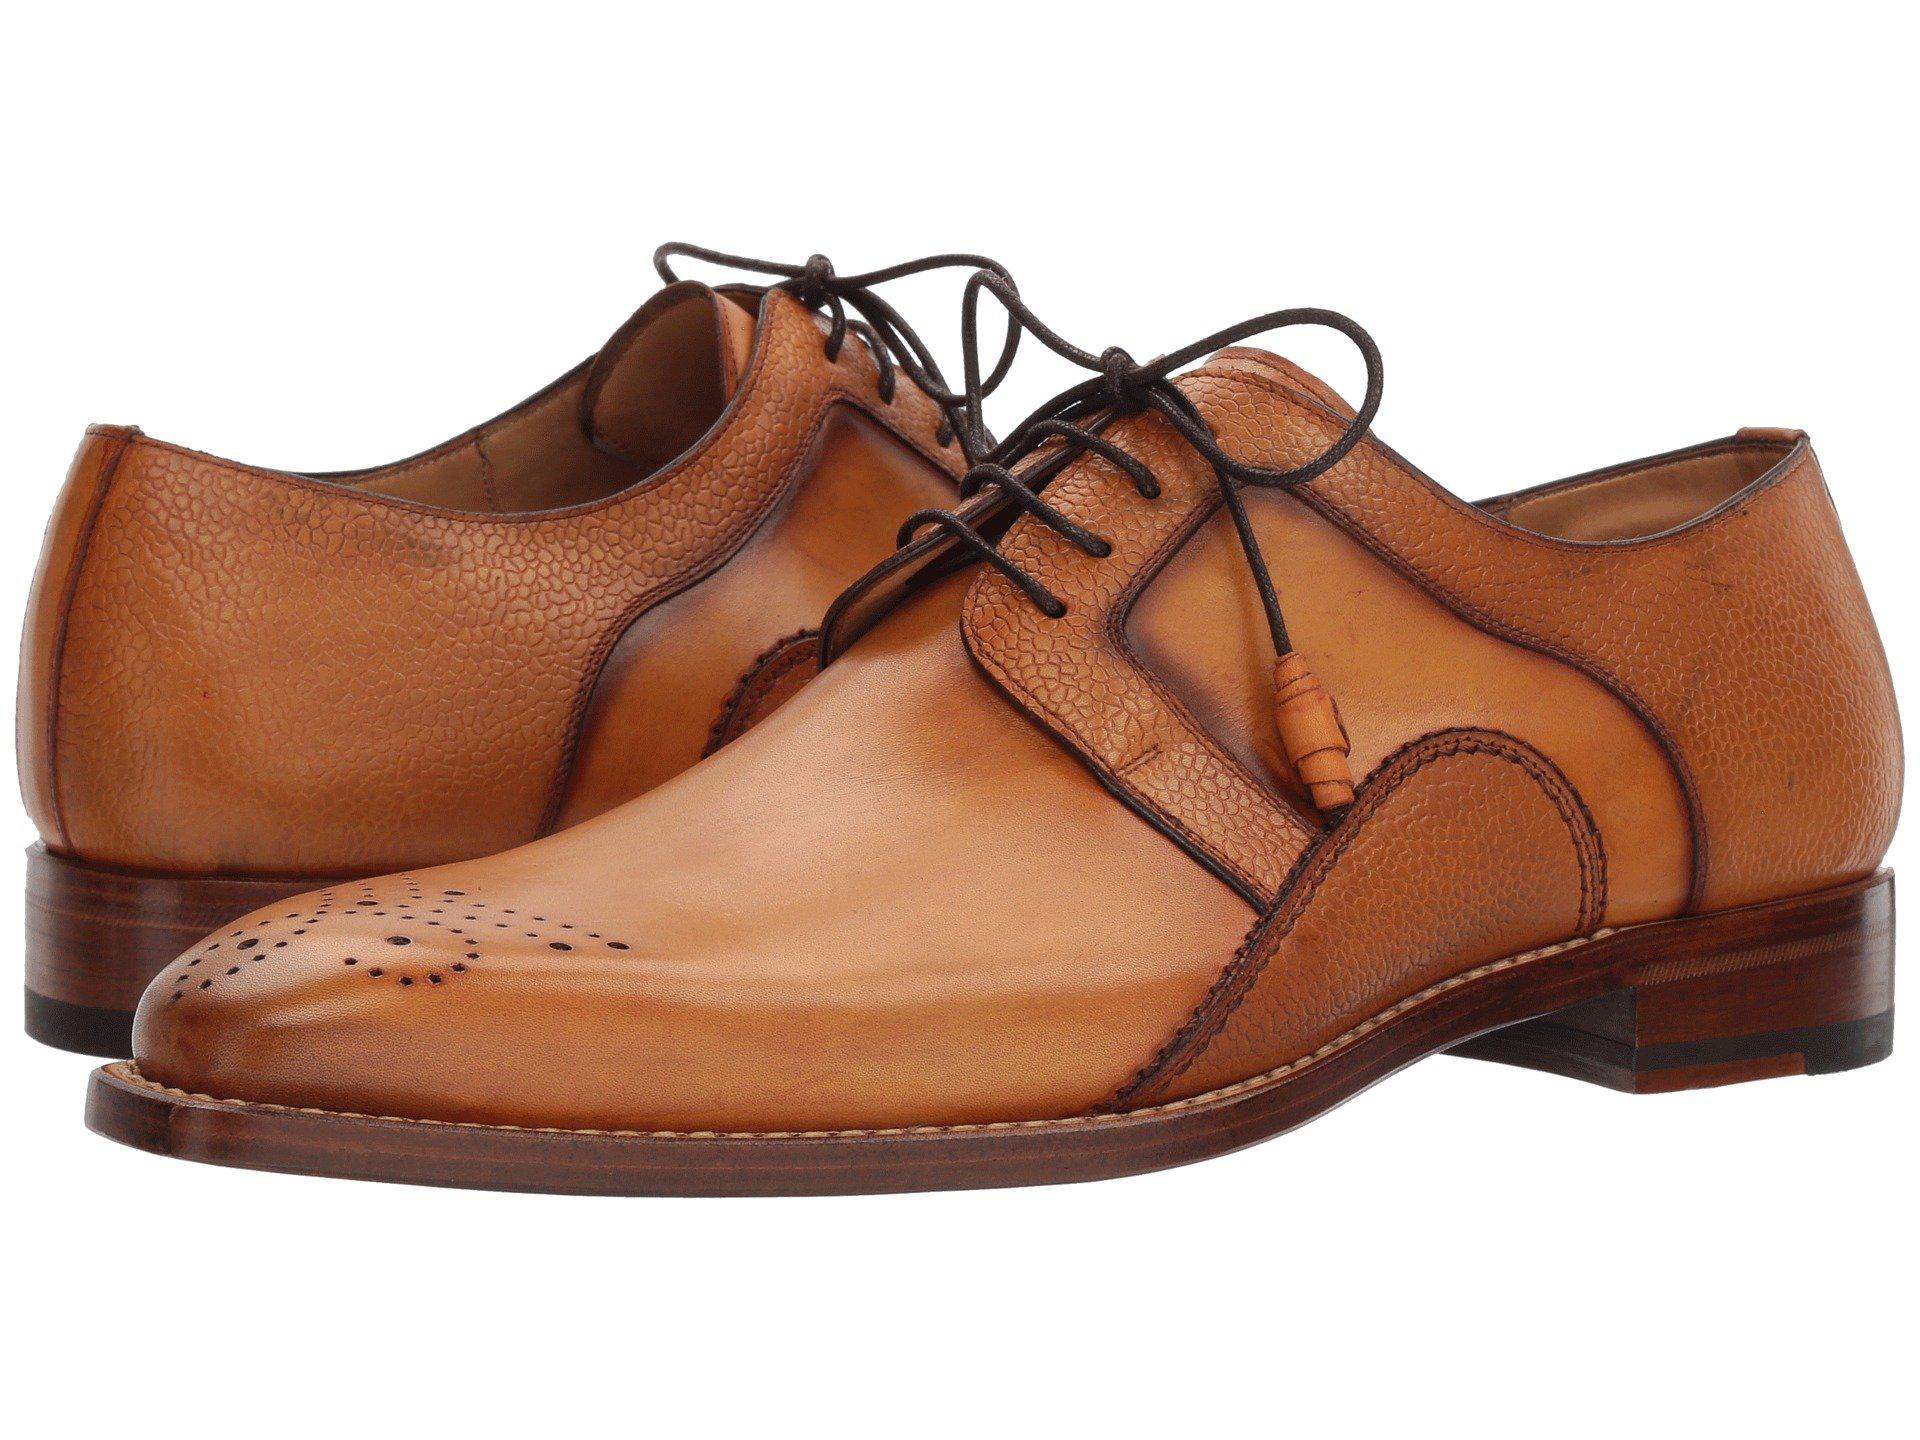 Mezlan Leather Saturno (tan) Shoes in 